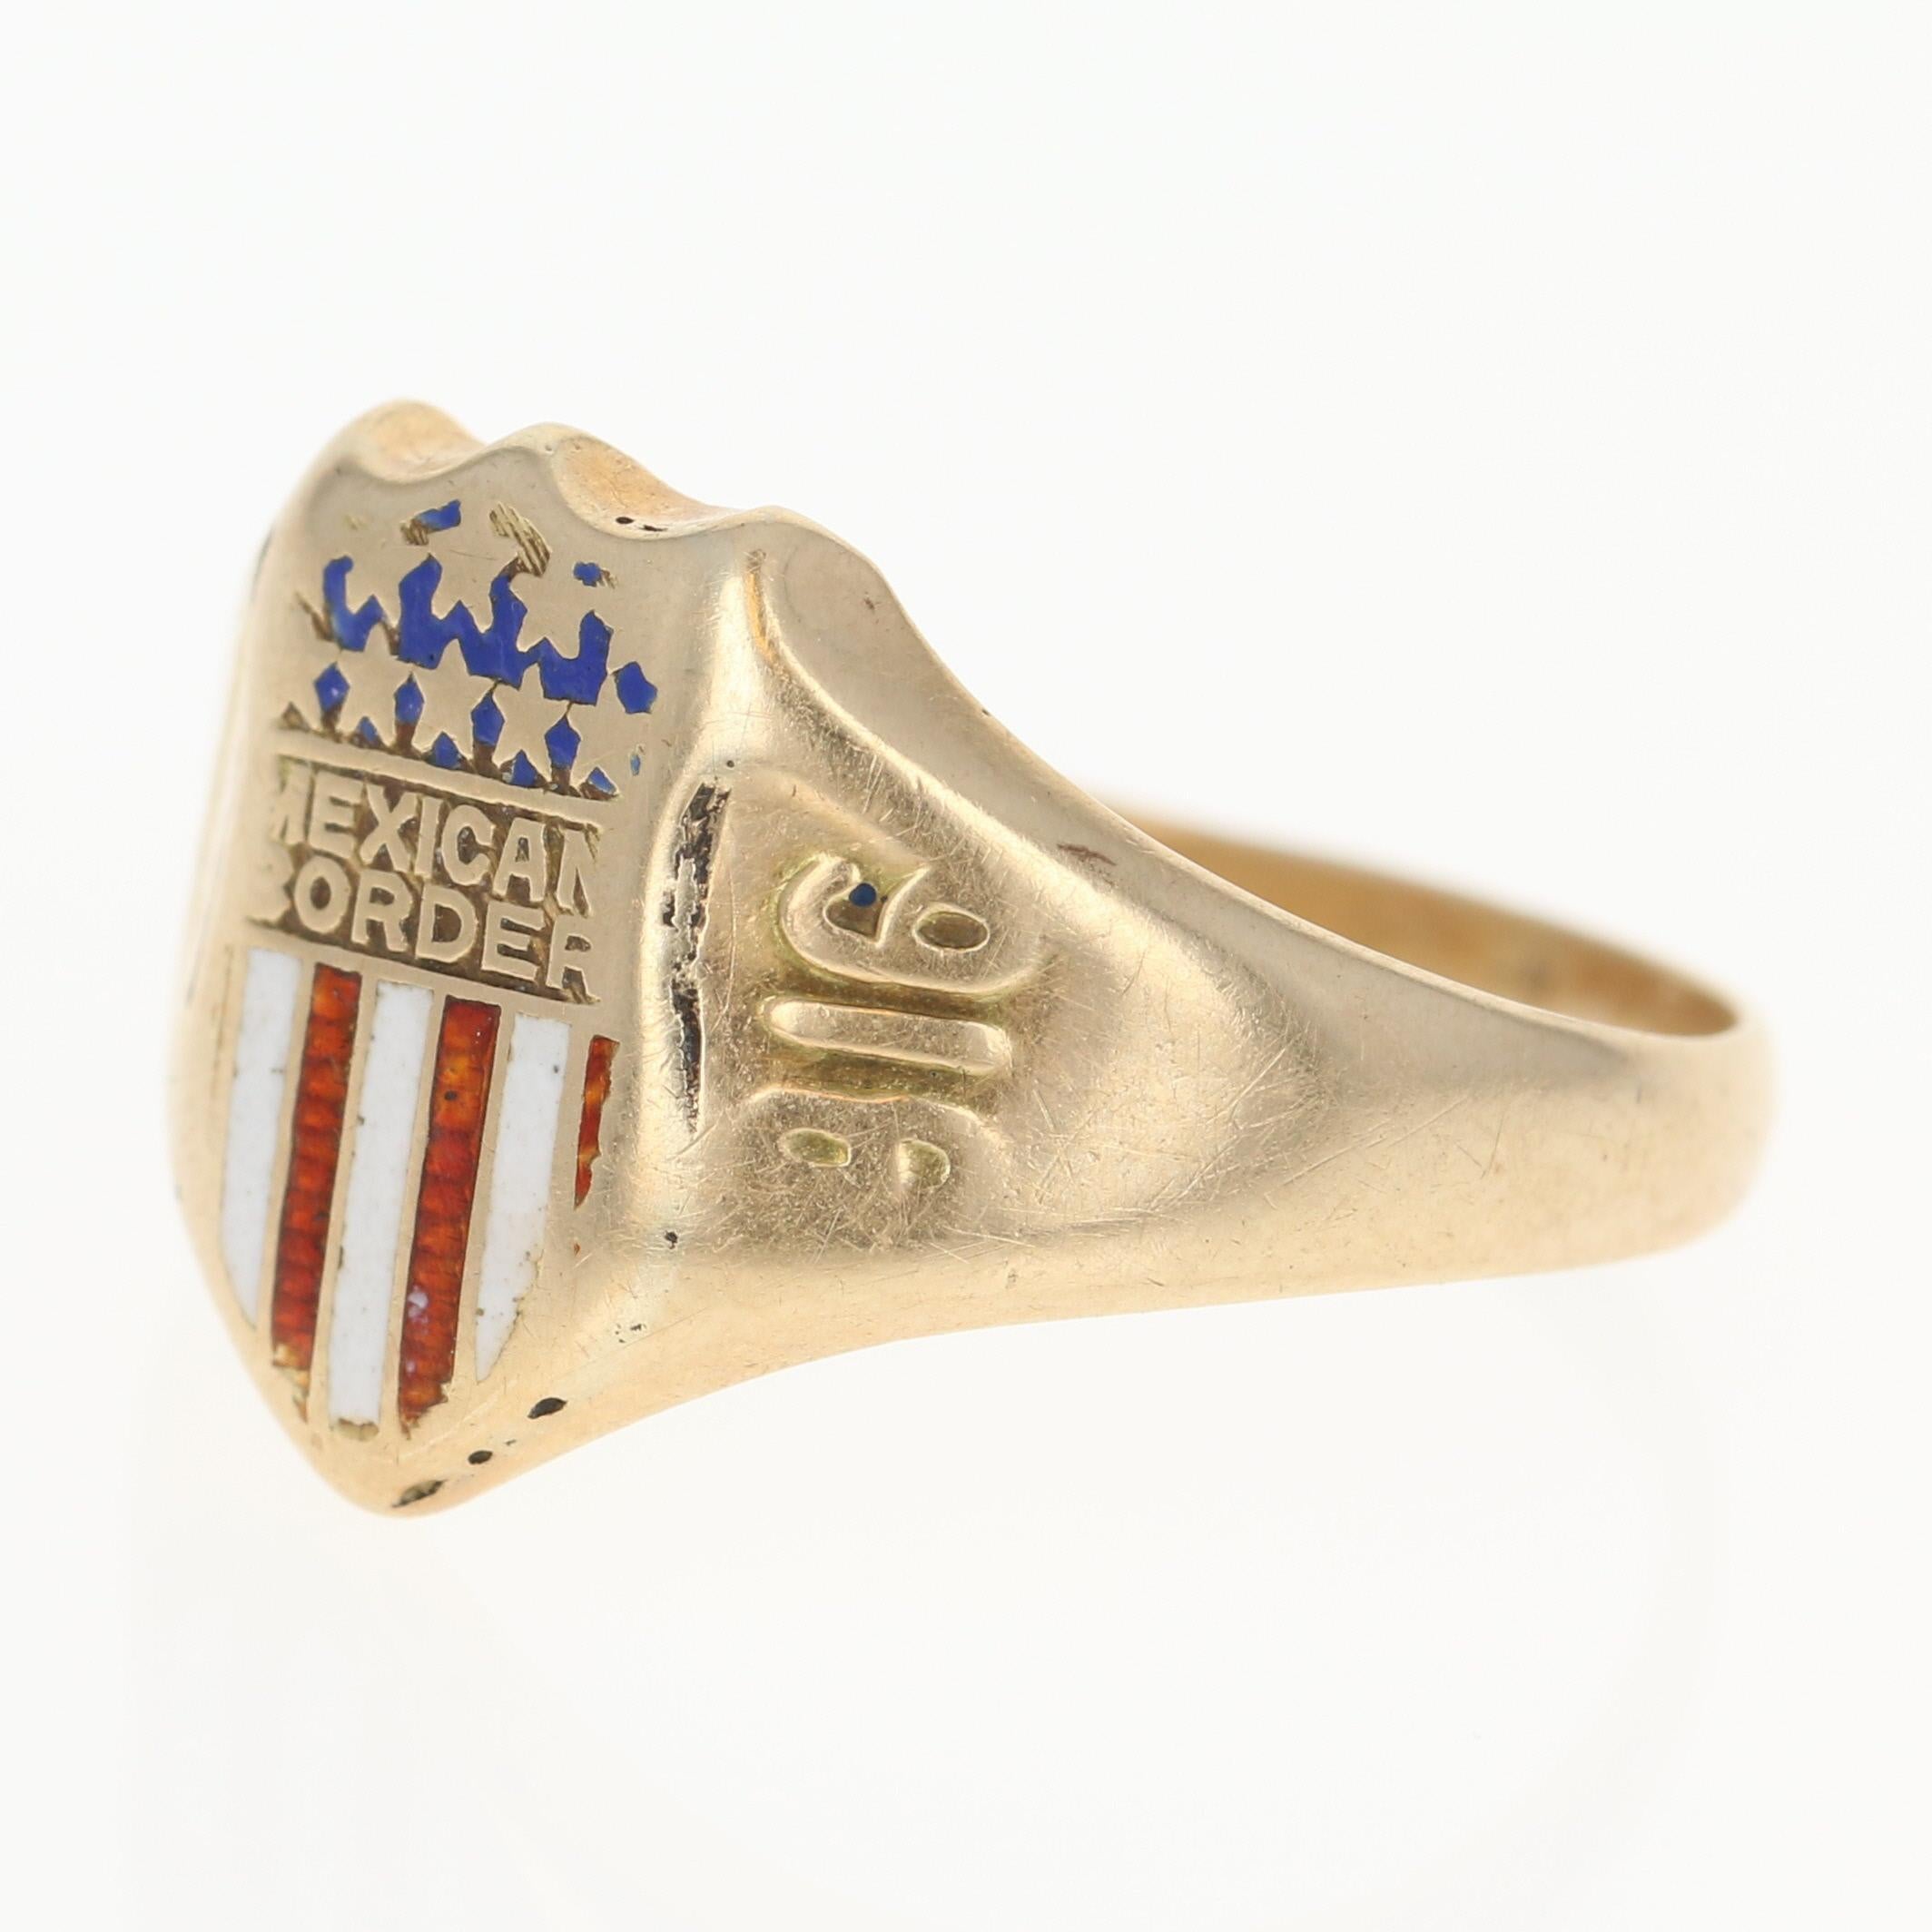 This great military collectible features an American flag shield patriotically displayed across the face. 